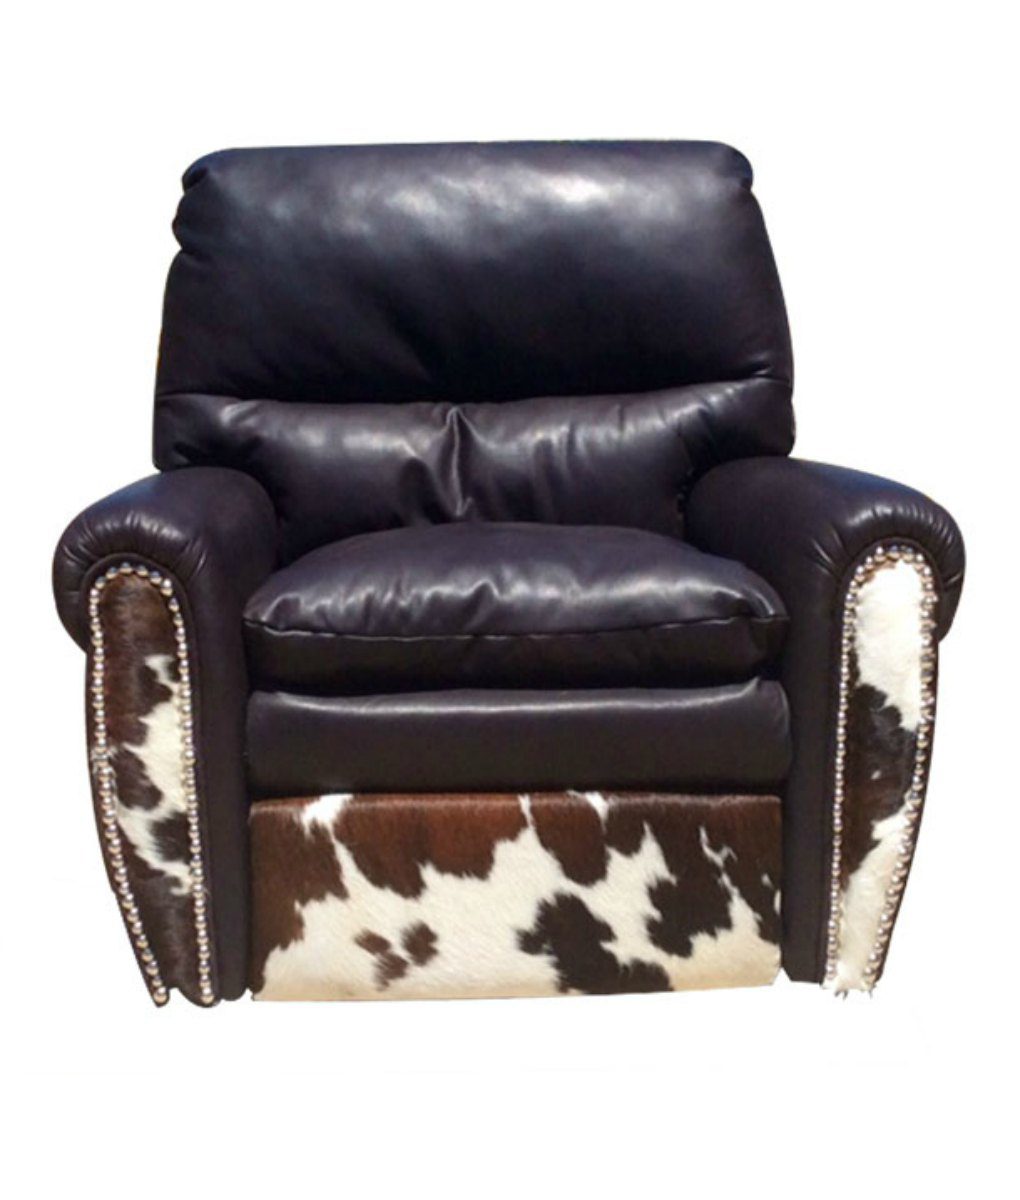 The Ultimate Recliner Fully, Soft Leather Recliner